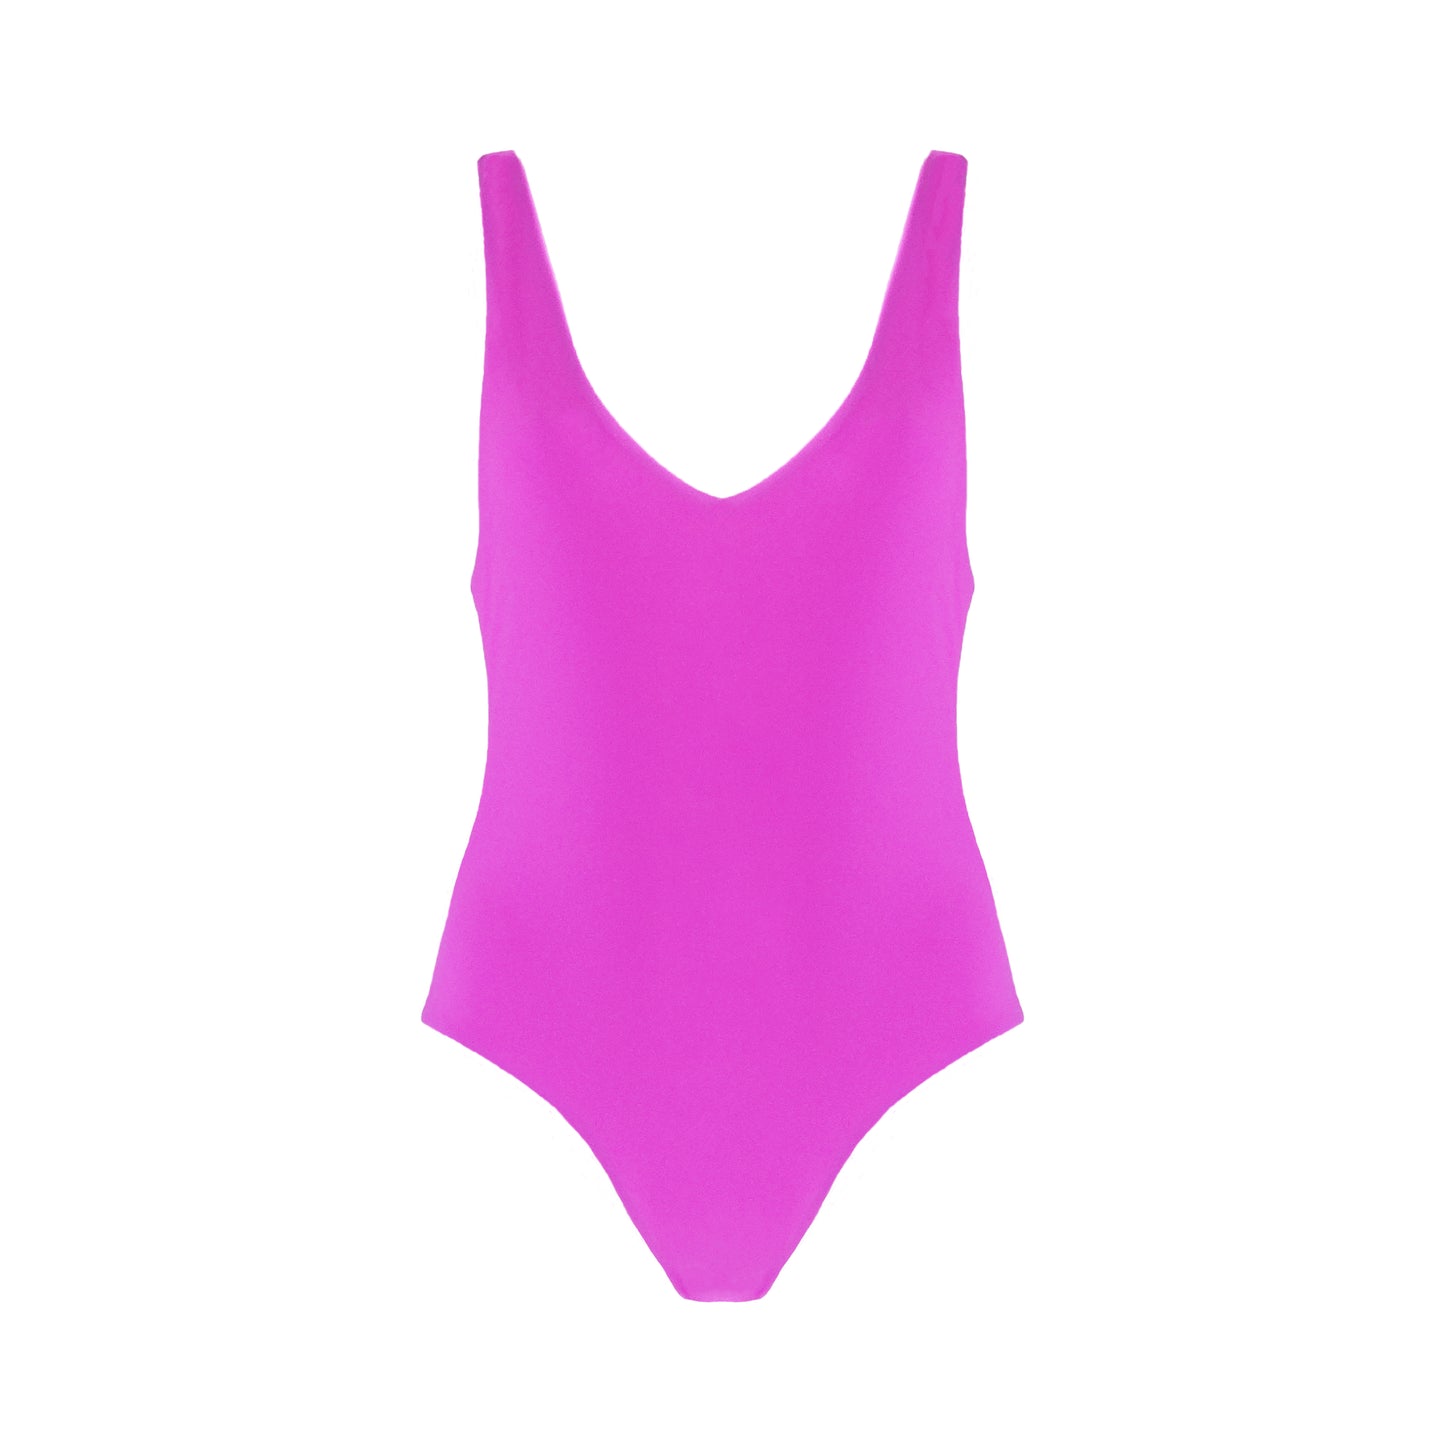 Barbie pink plunging v-neck one piece swimsuit with low back, high cut legs, and cheeky bum coverage.